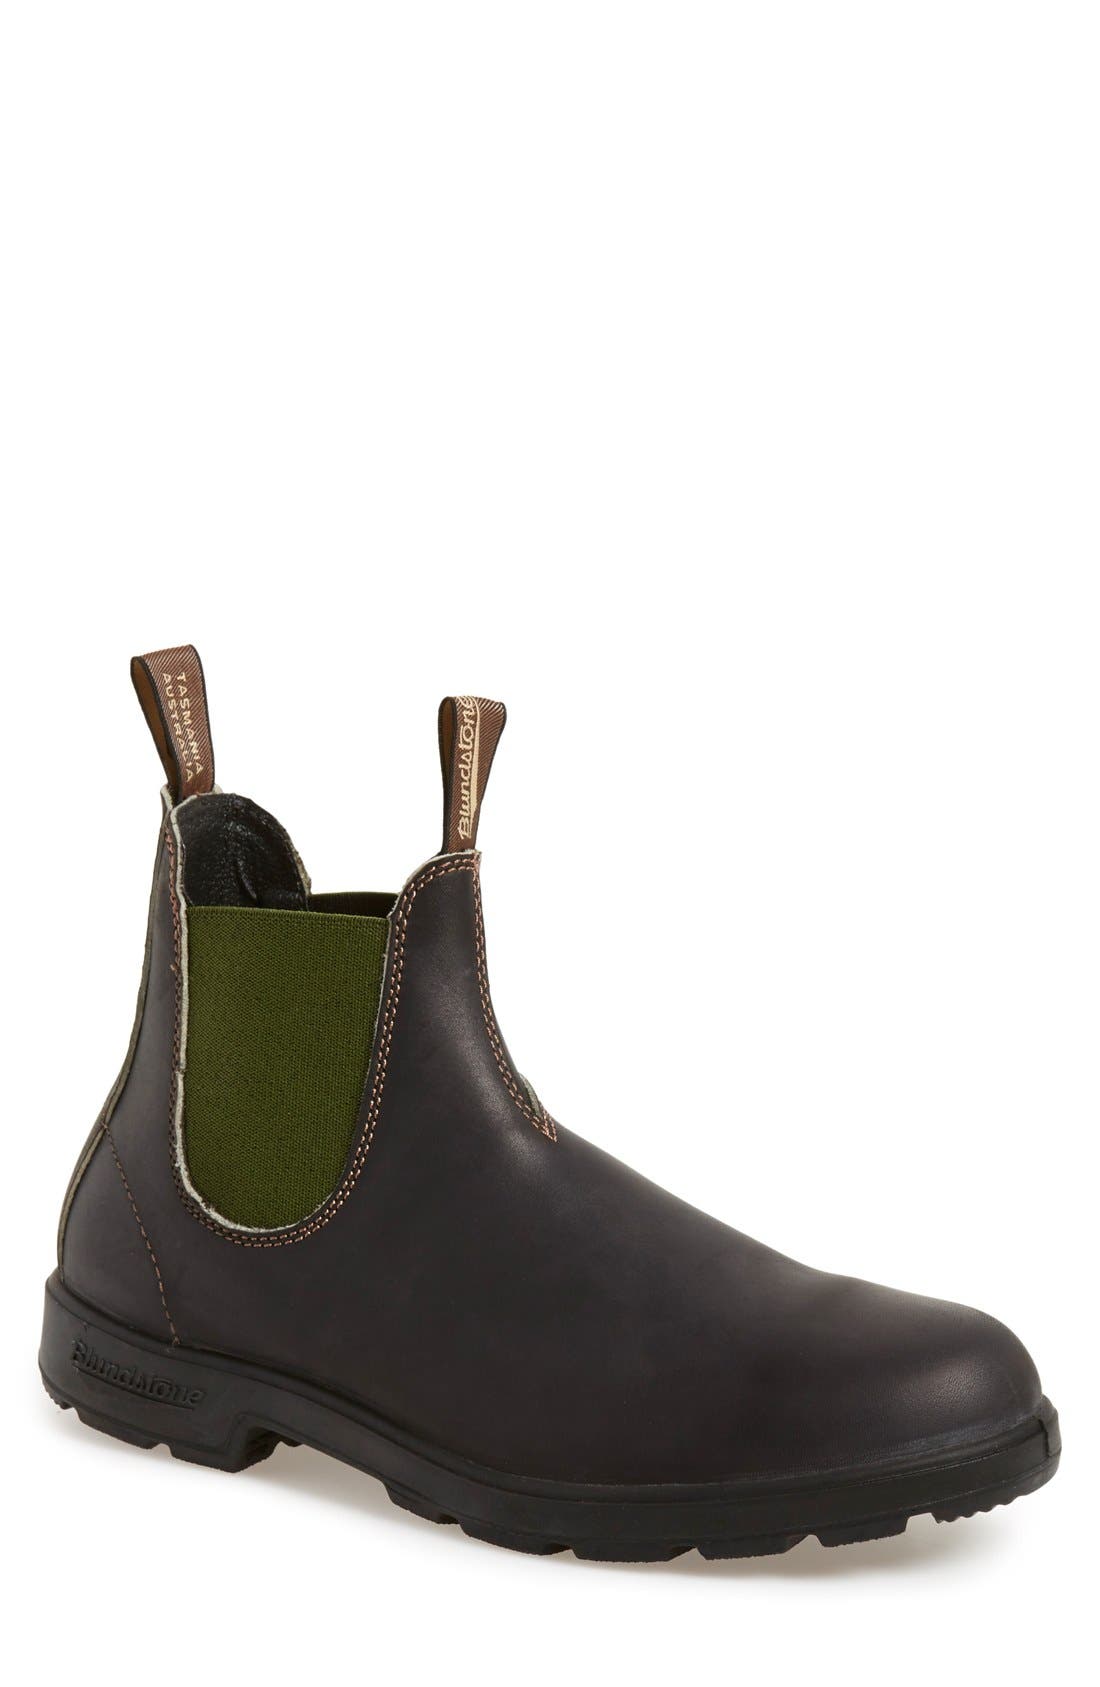 blundstone boots nordstrom